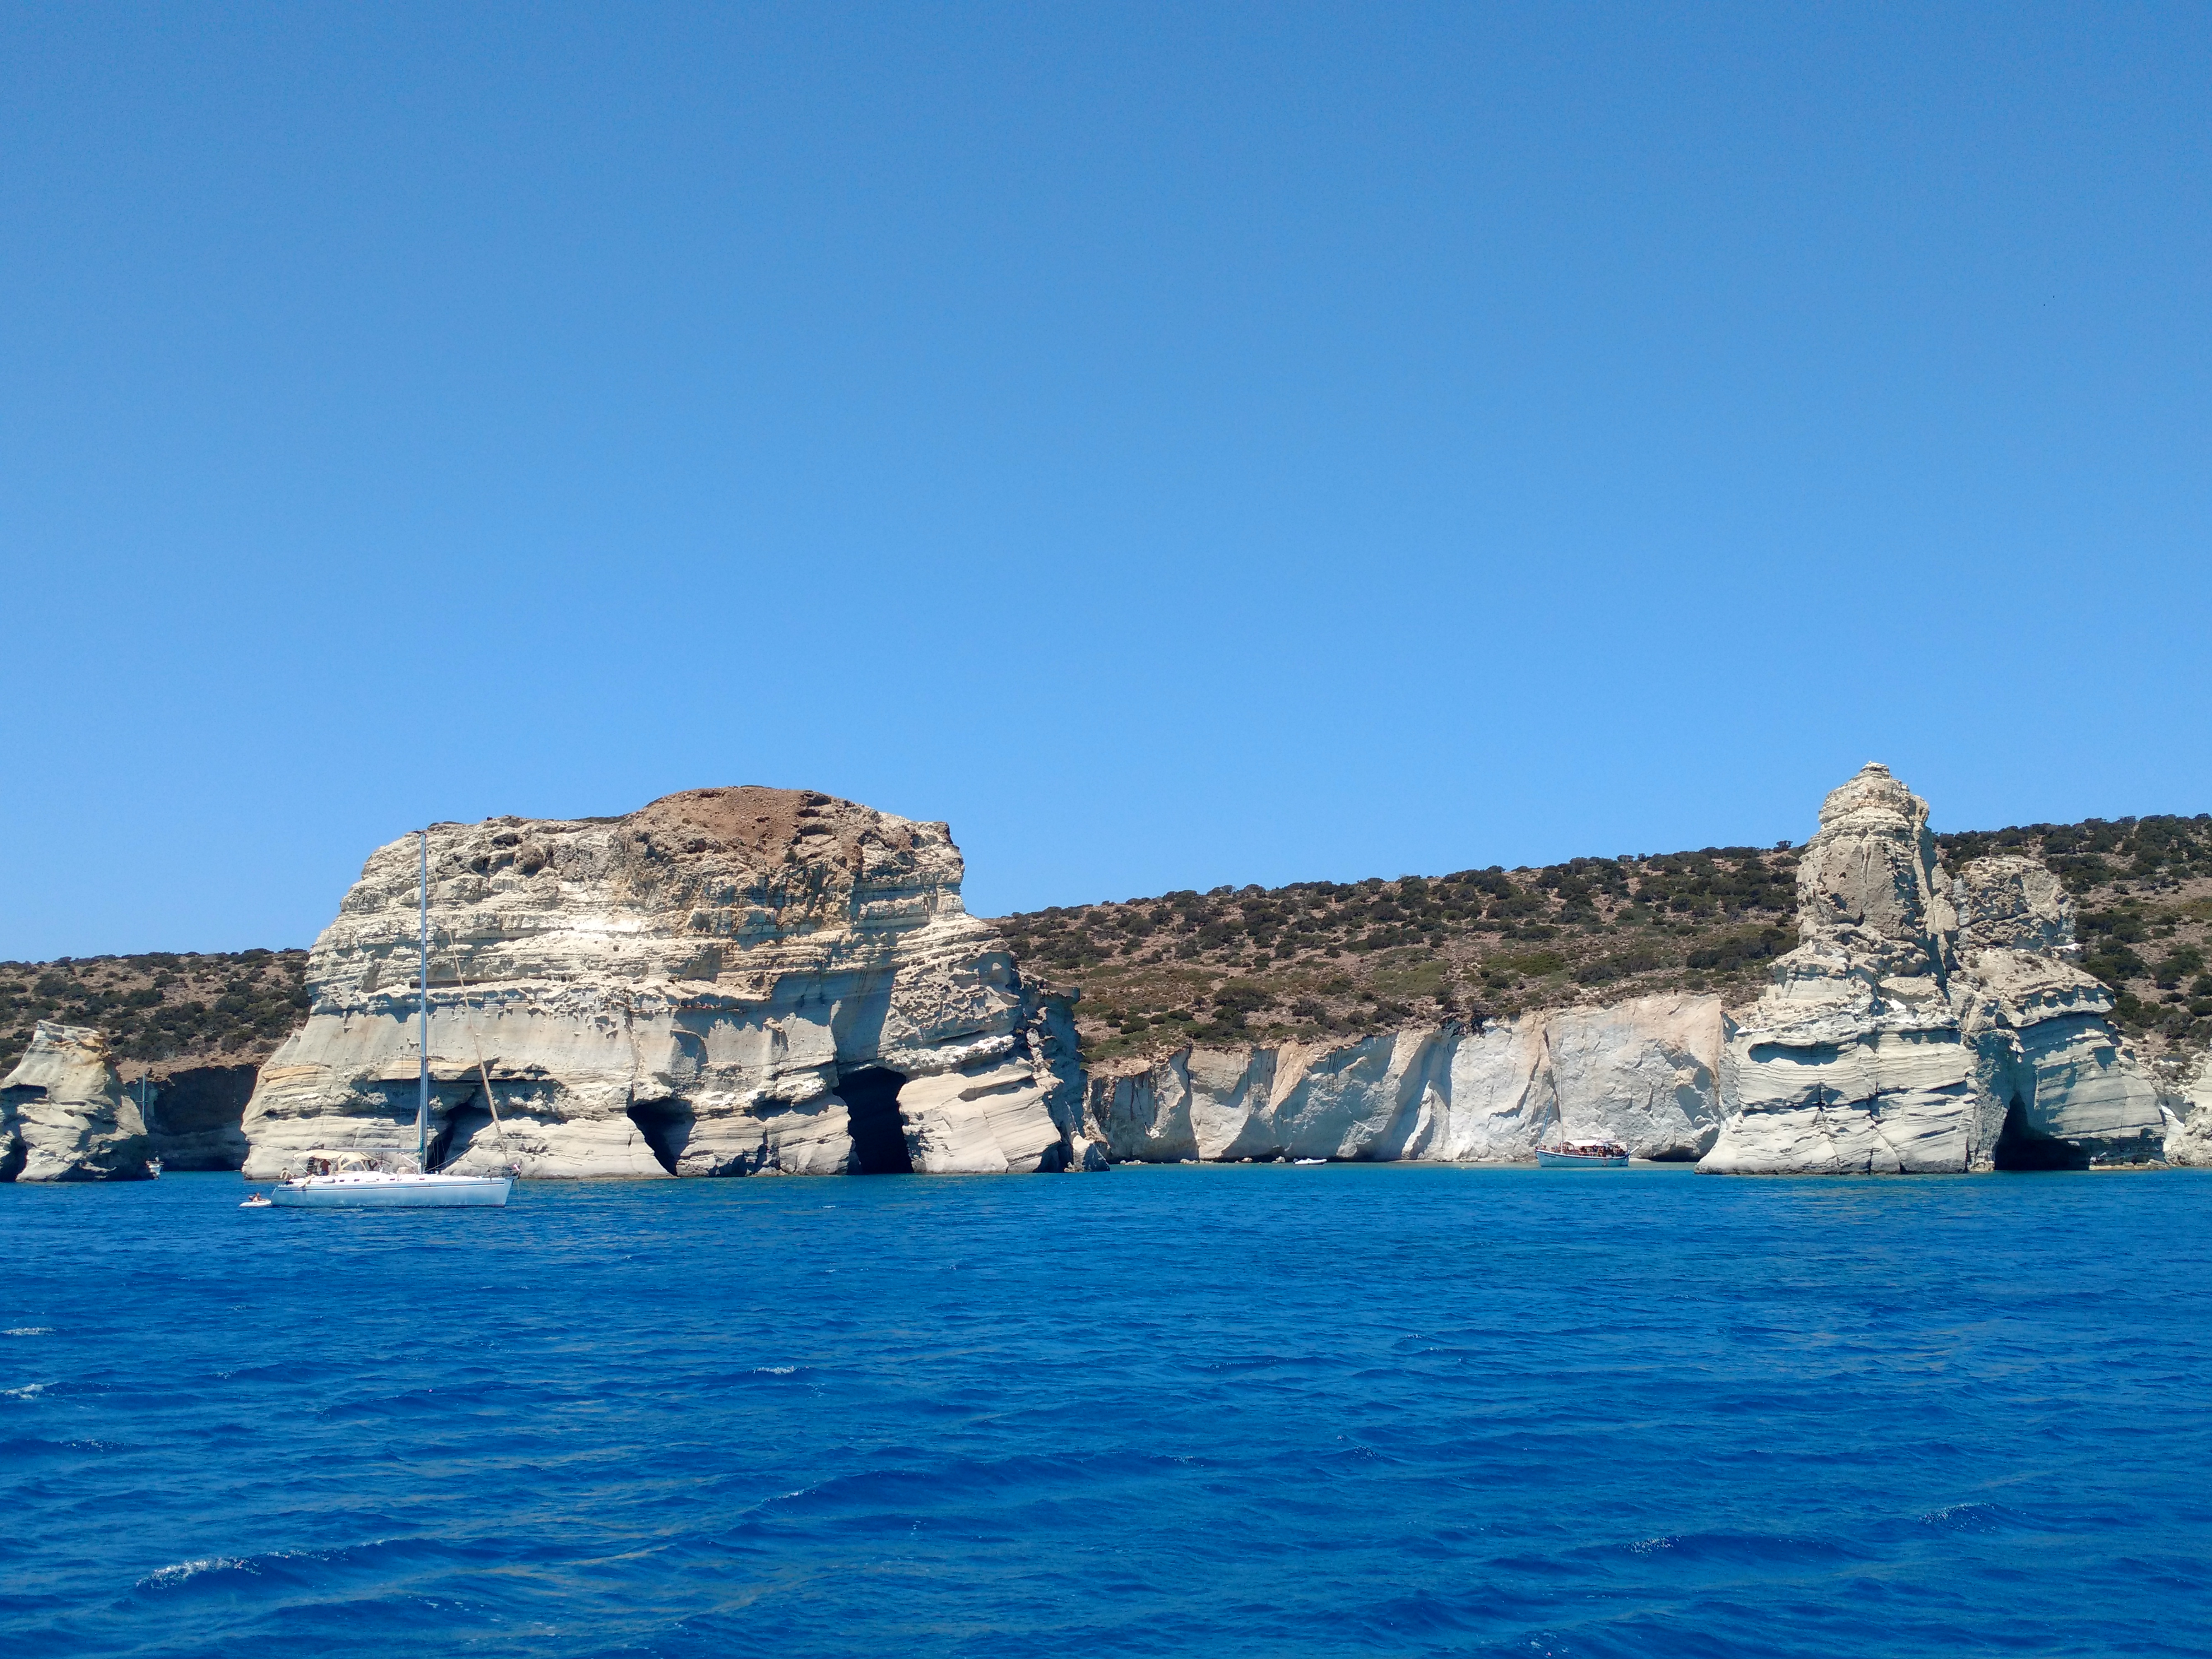 Cyclades Sailing: Milos has many interesting places to visit by boat, like the caves of Kleftiko.